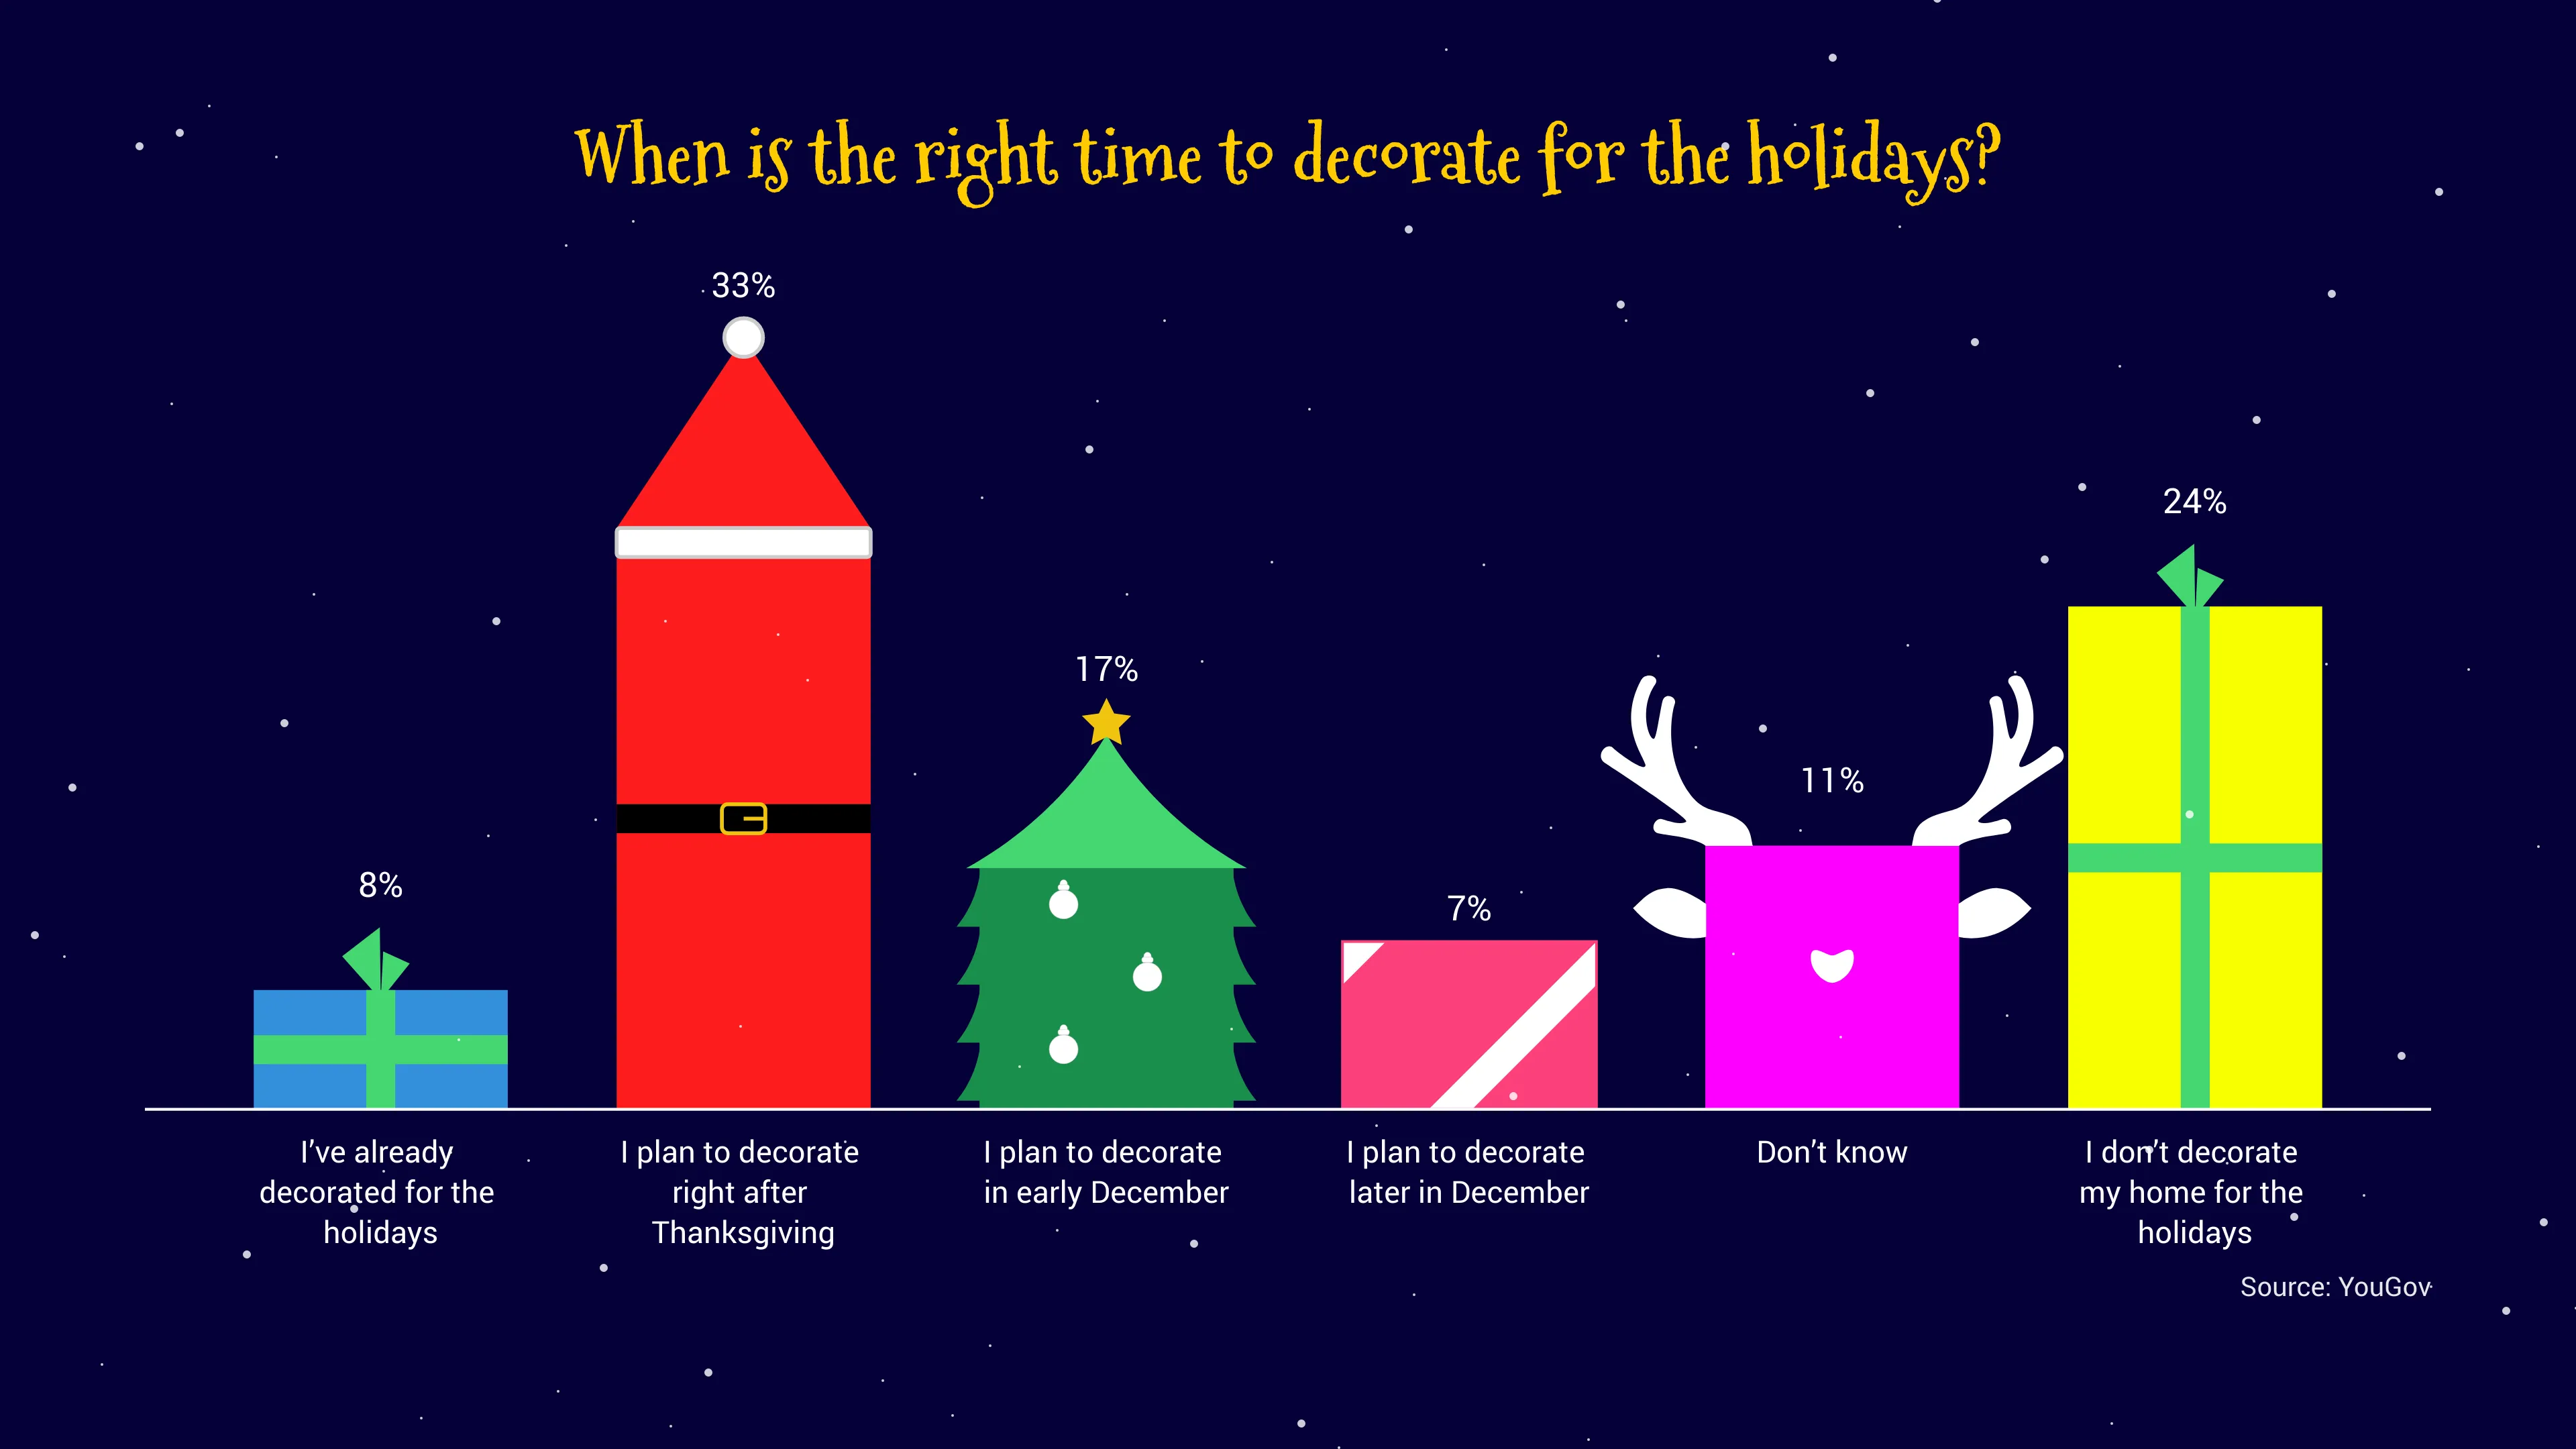 When is the right time to decorate for the holidays?